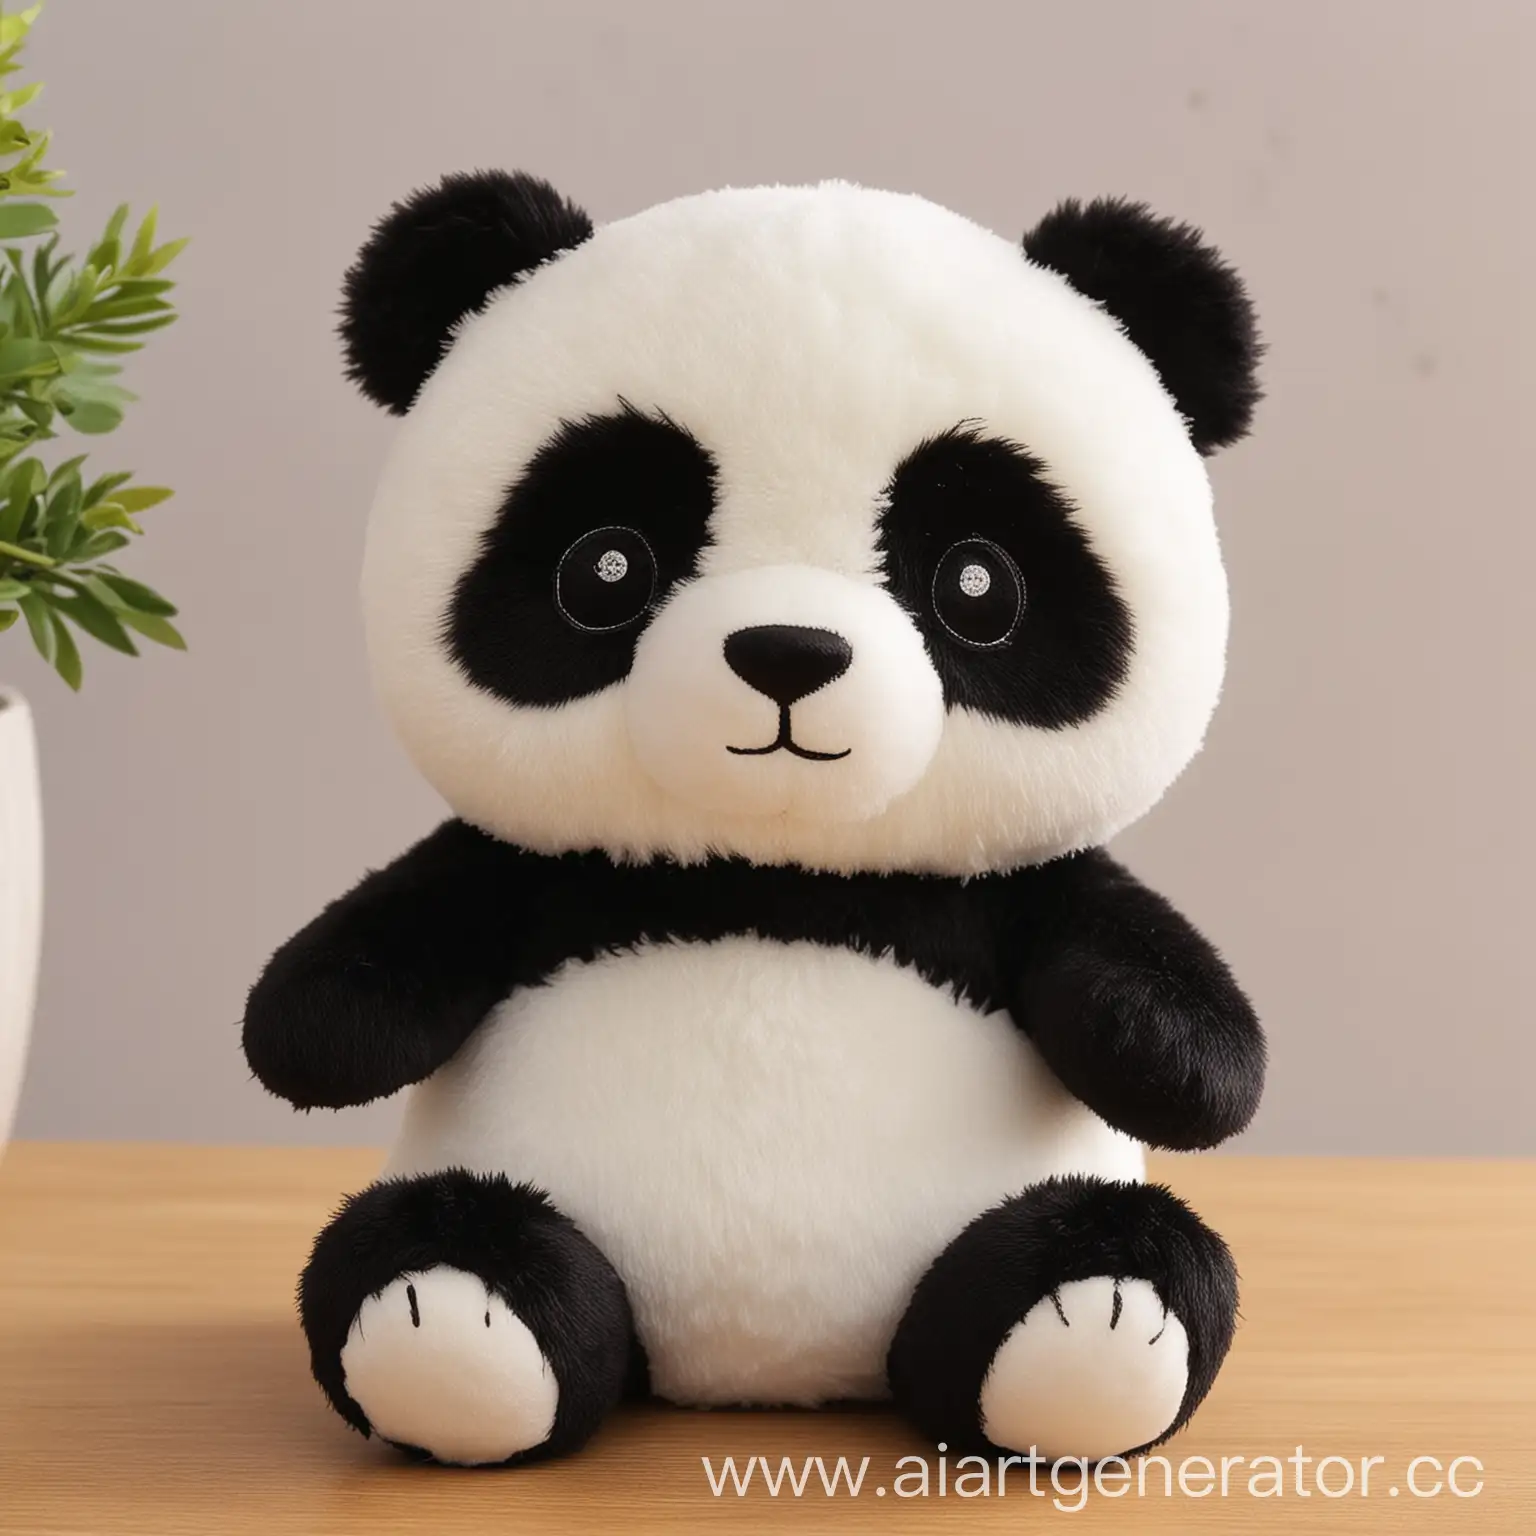 Adorable-Panda-Plush-Toy-Soft-and-Cuddly-Stuffed-Animal-for-Kids